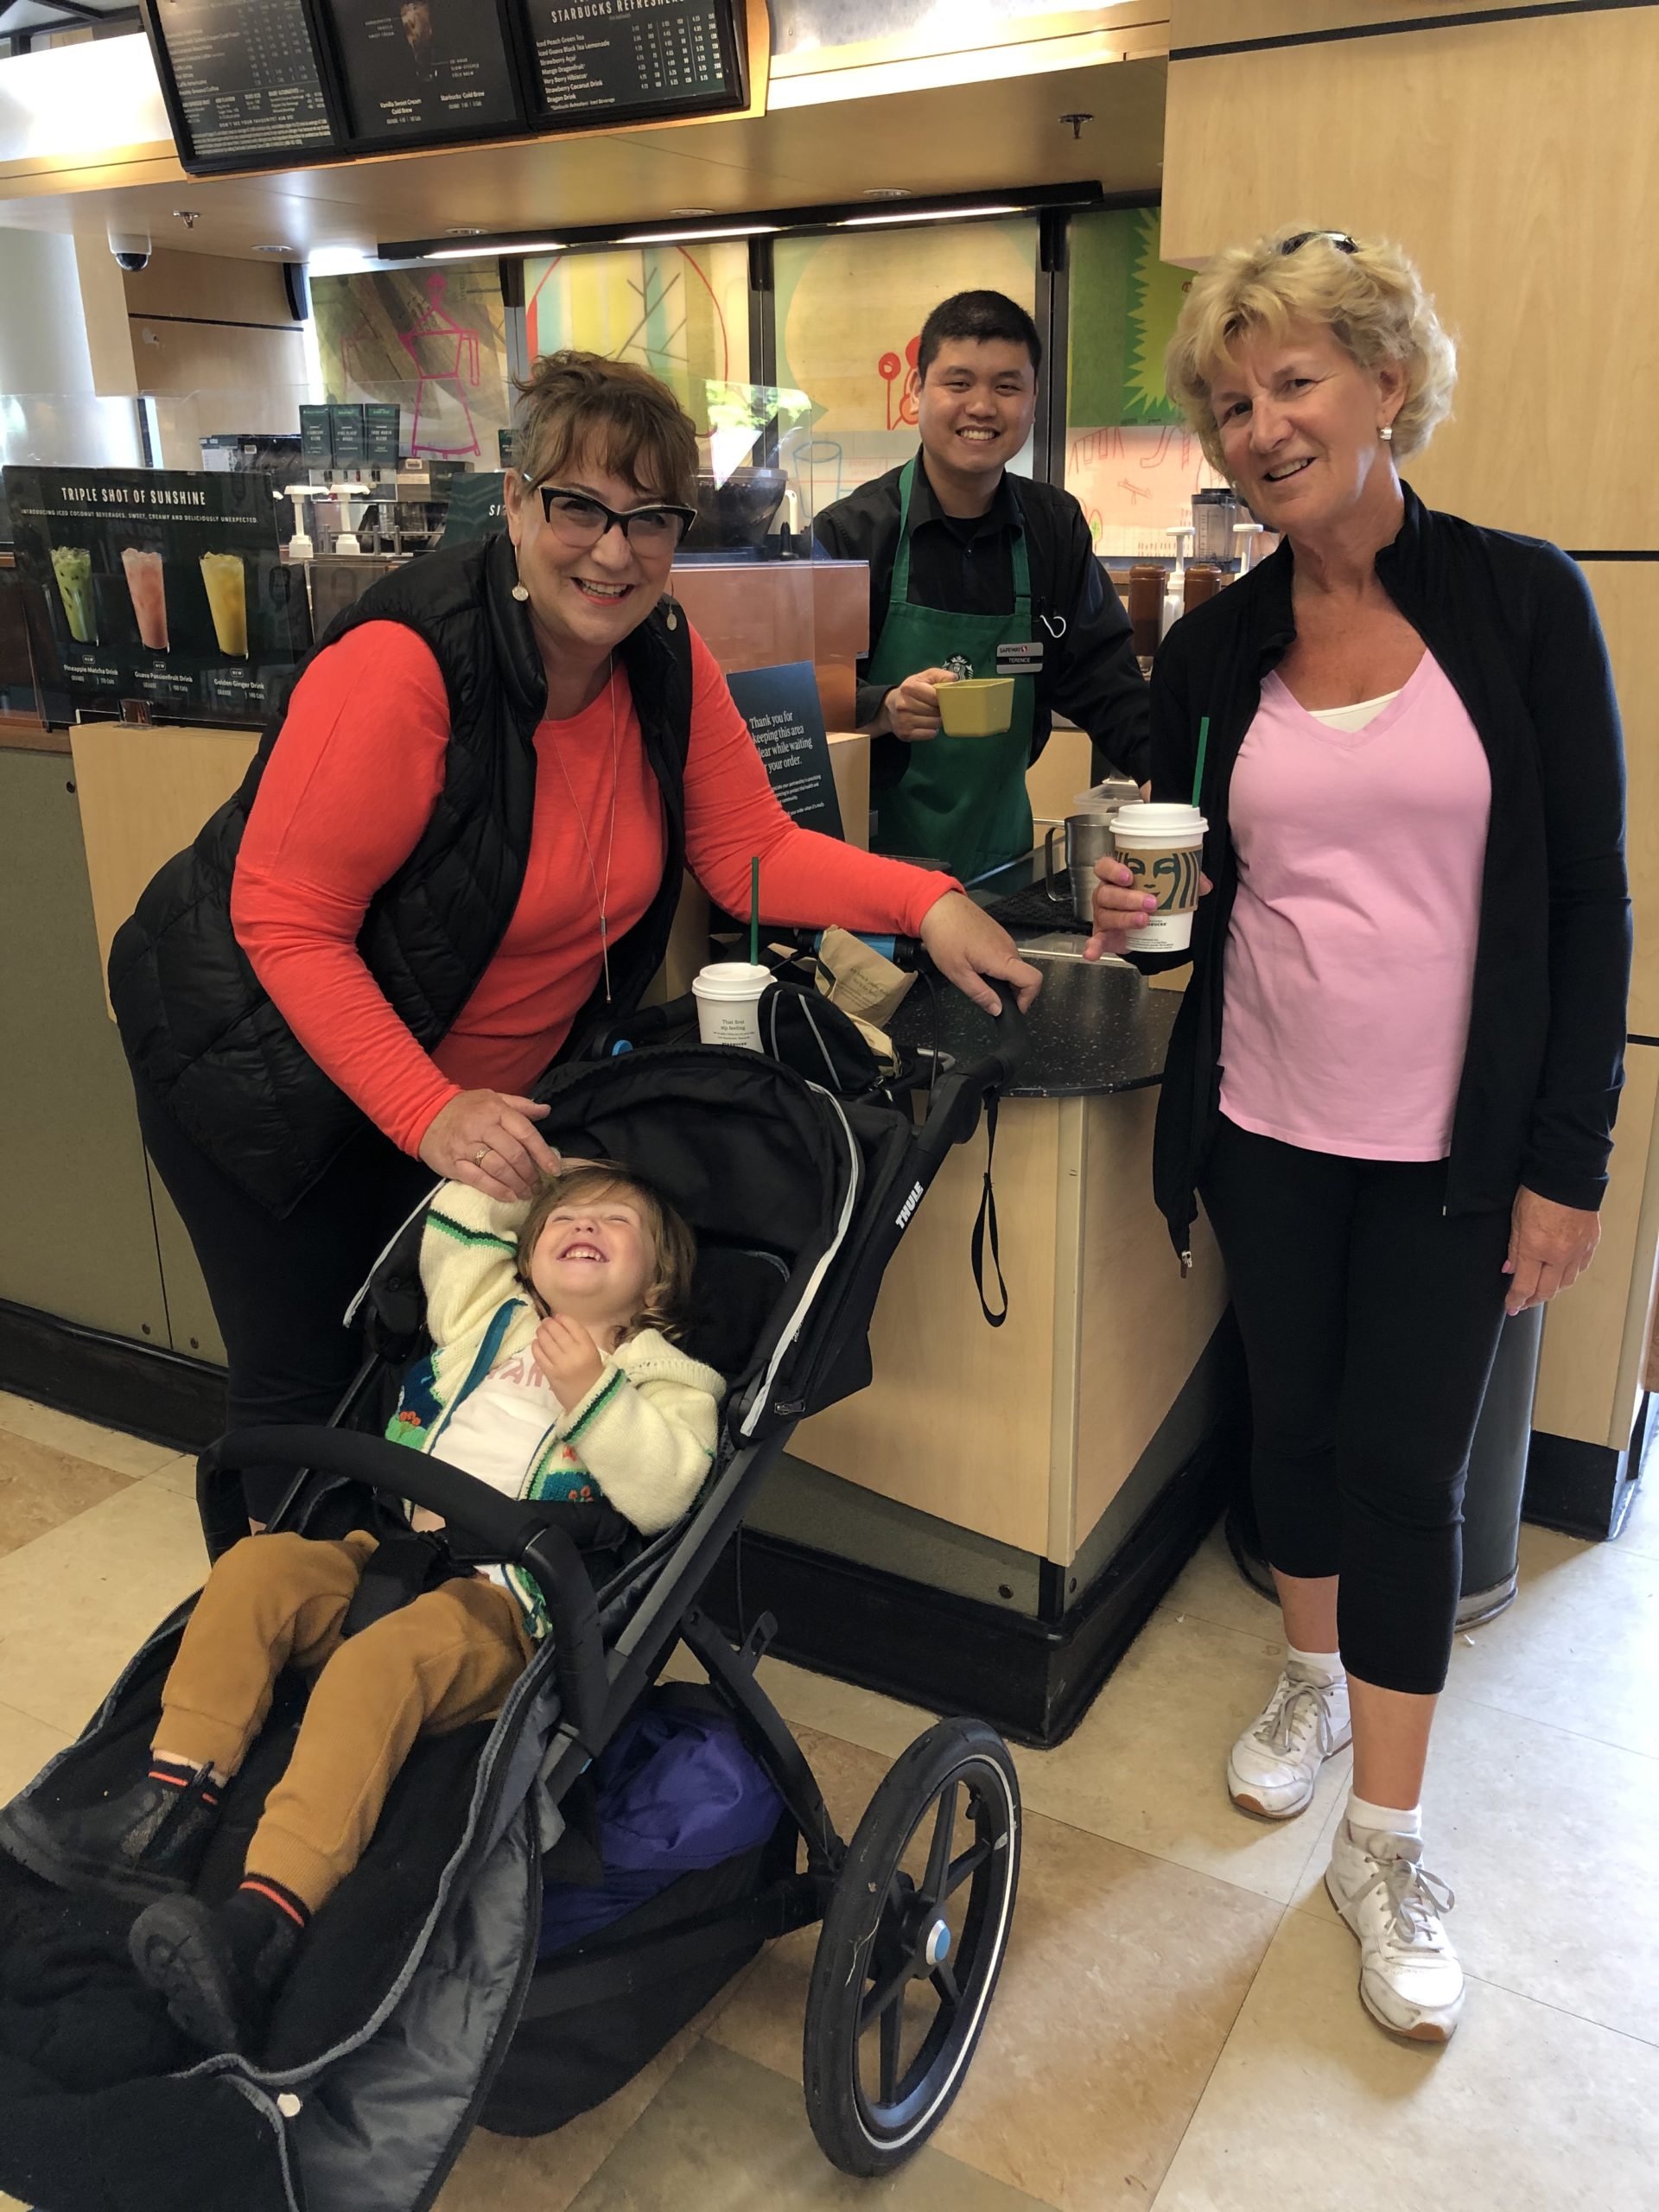 A barista smiles with two customers and a child in a stroller.